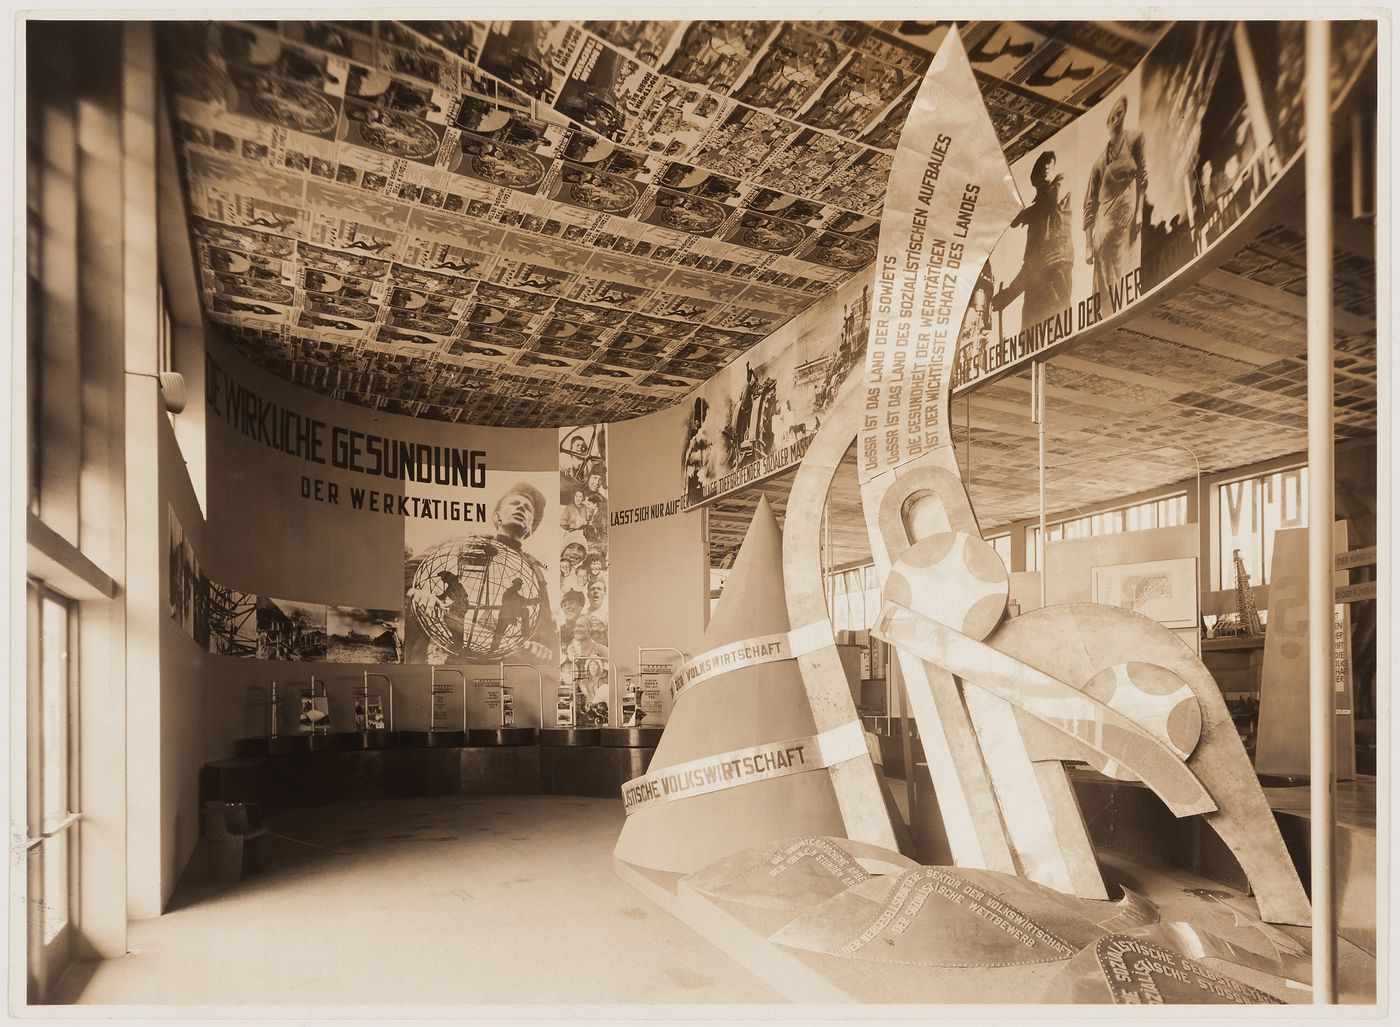 Interior view of the Soviet Union installation designed by El Lissitzky showing murals and sculpture, Dresden Hygiene Exhibition, Germany